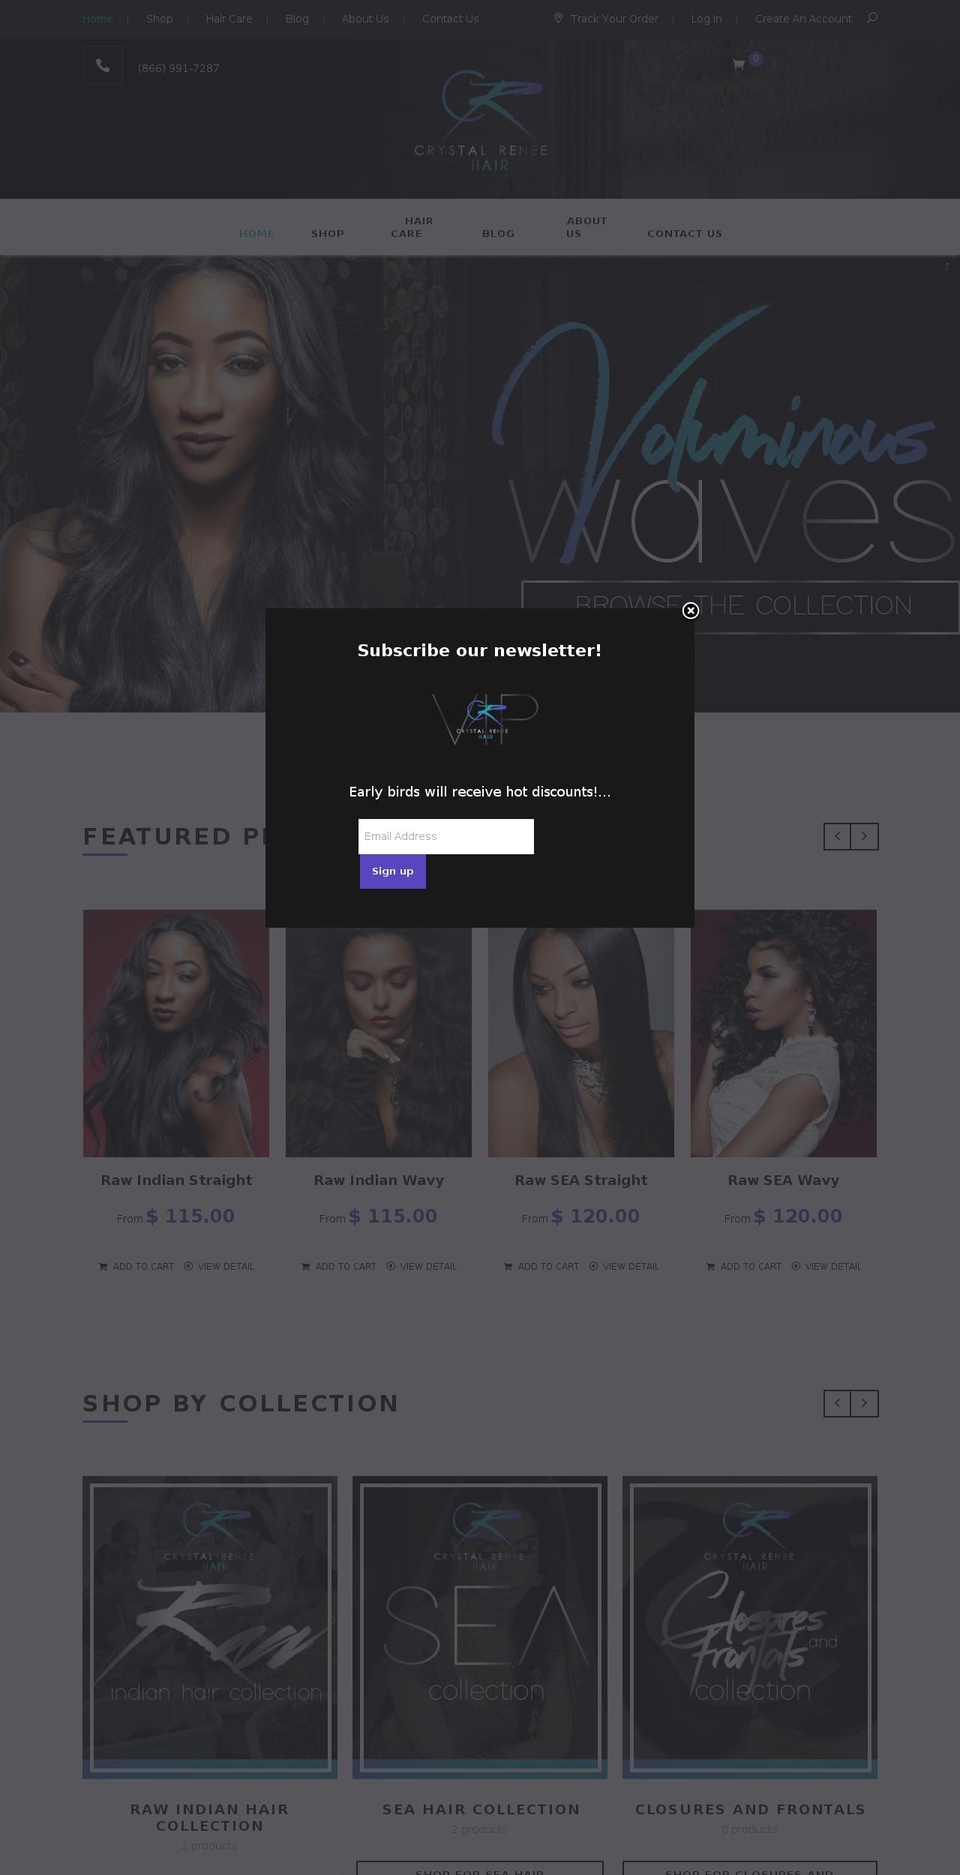 deshop Shopify theme site example crystalreneehair.com